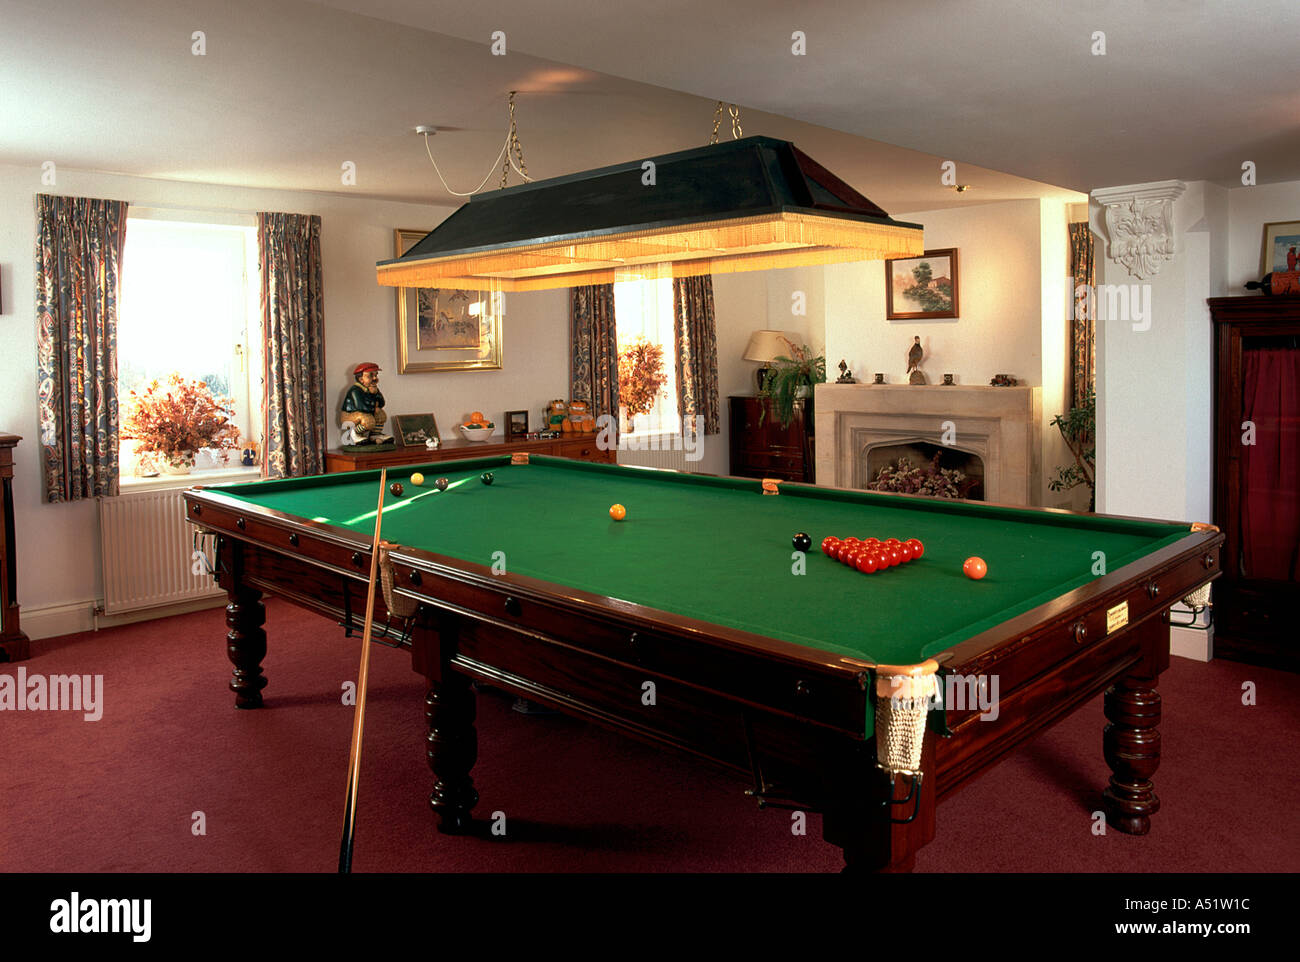 Interior, games room, snooker table Stock Photo